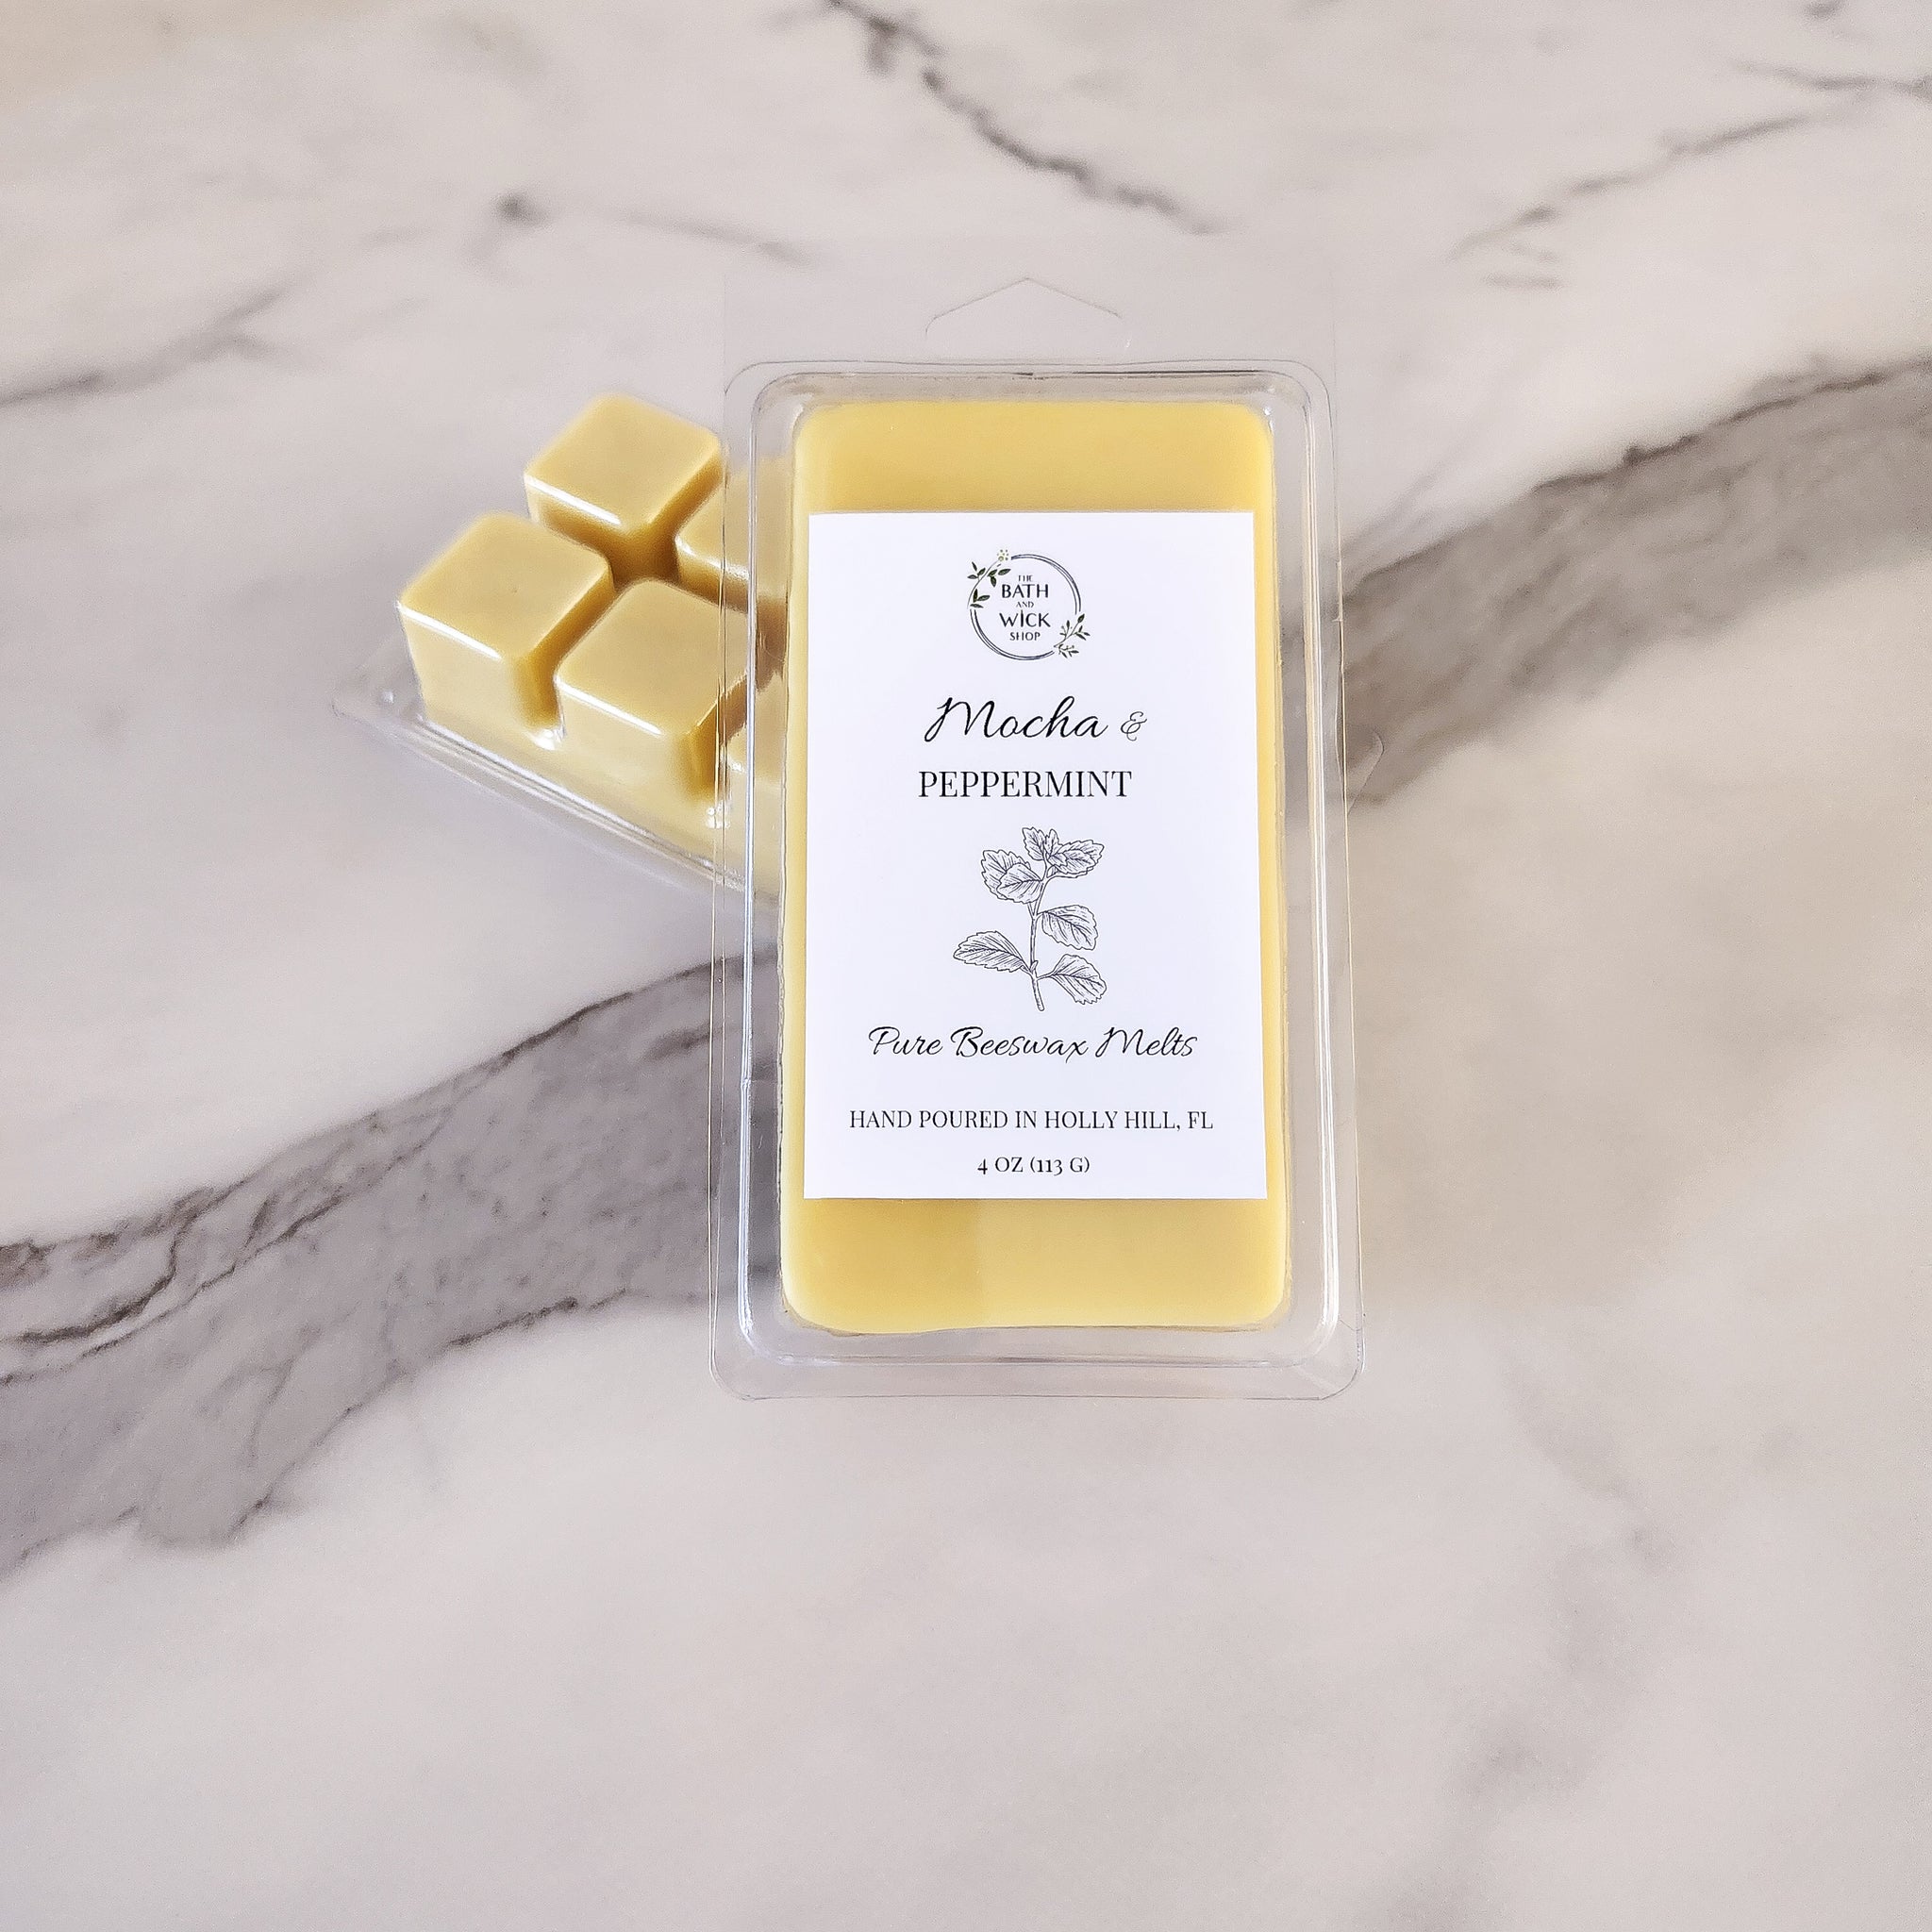 Mocha & Peppermint Pure Beeswax Melts | Large 8 Cube